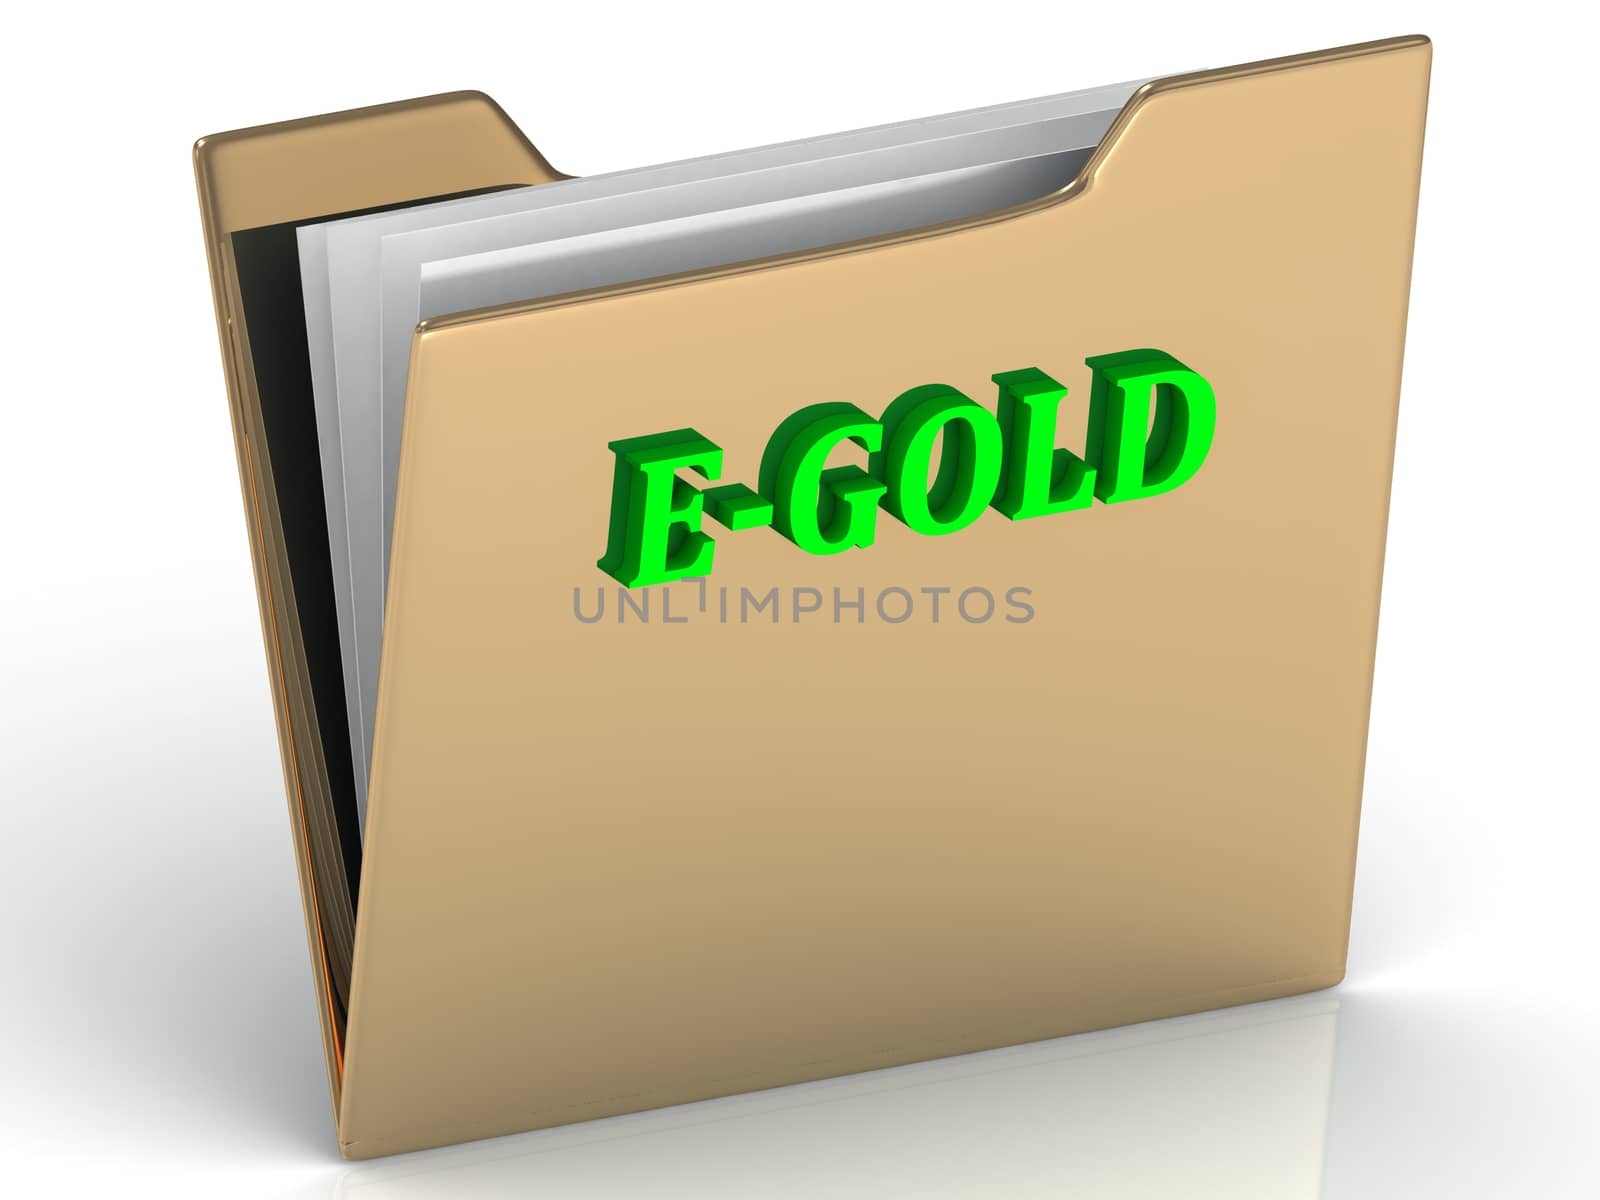 E-GOLD- bright color letters on a gold folder by GreenMost